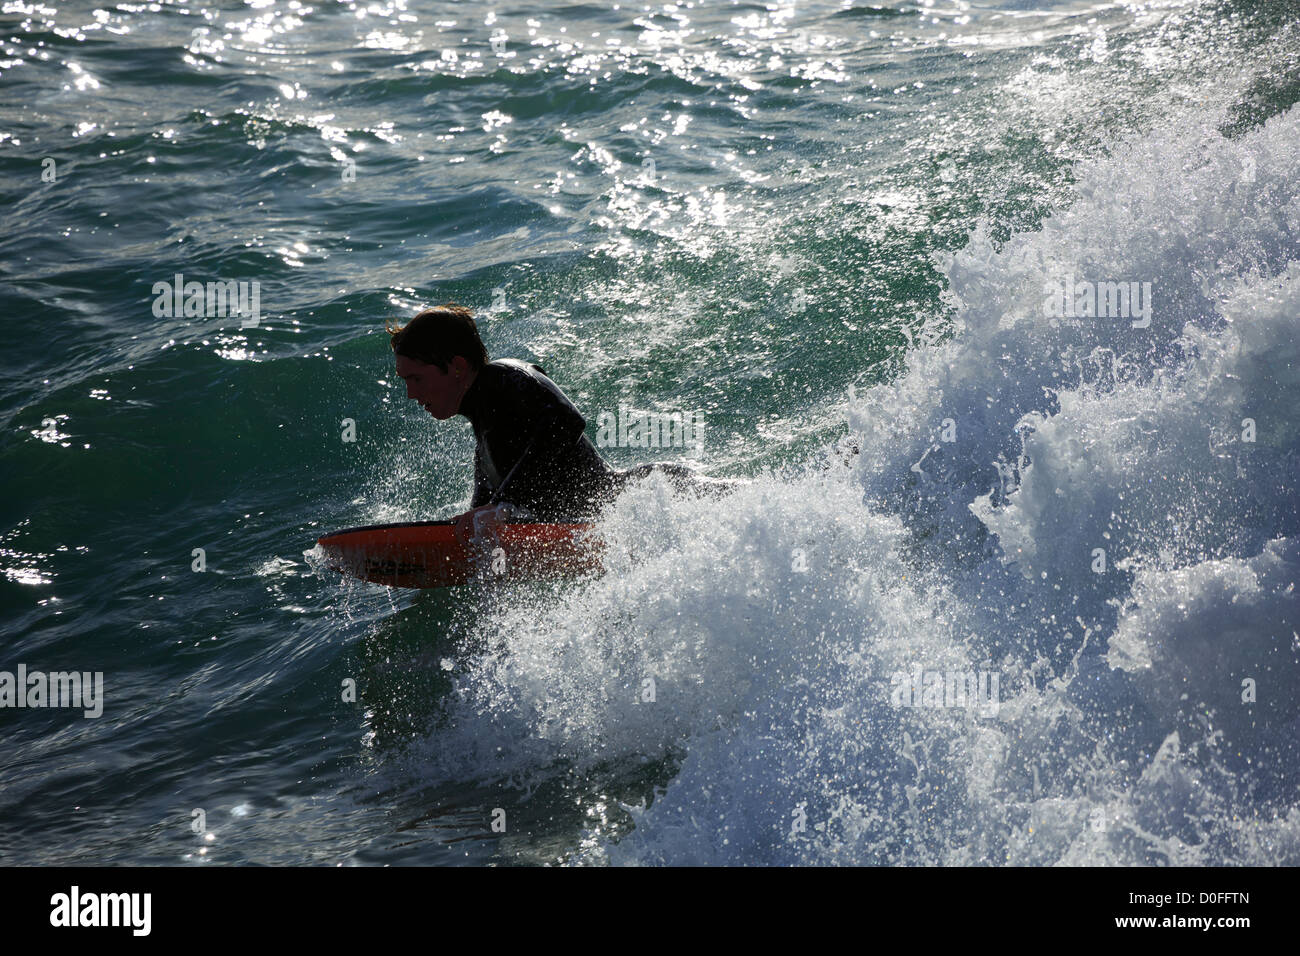 Surfer at Porthleven, Cornwall. A surfer shows intense concentration as he rides a wave lying on his bodyboard. Stock Photo